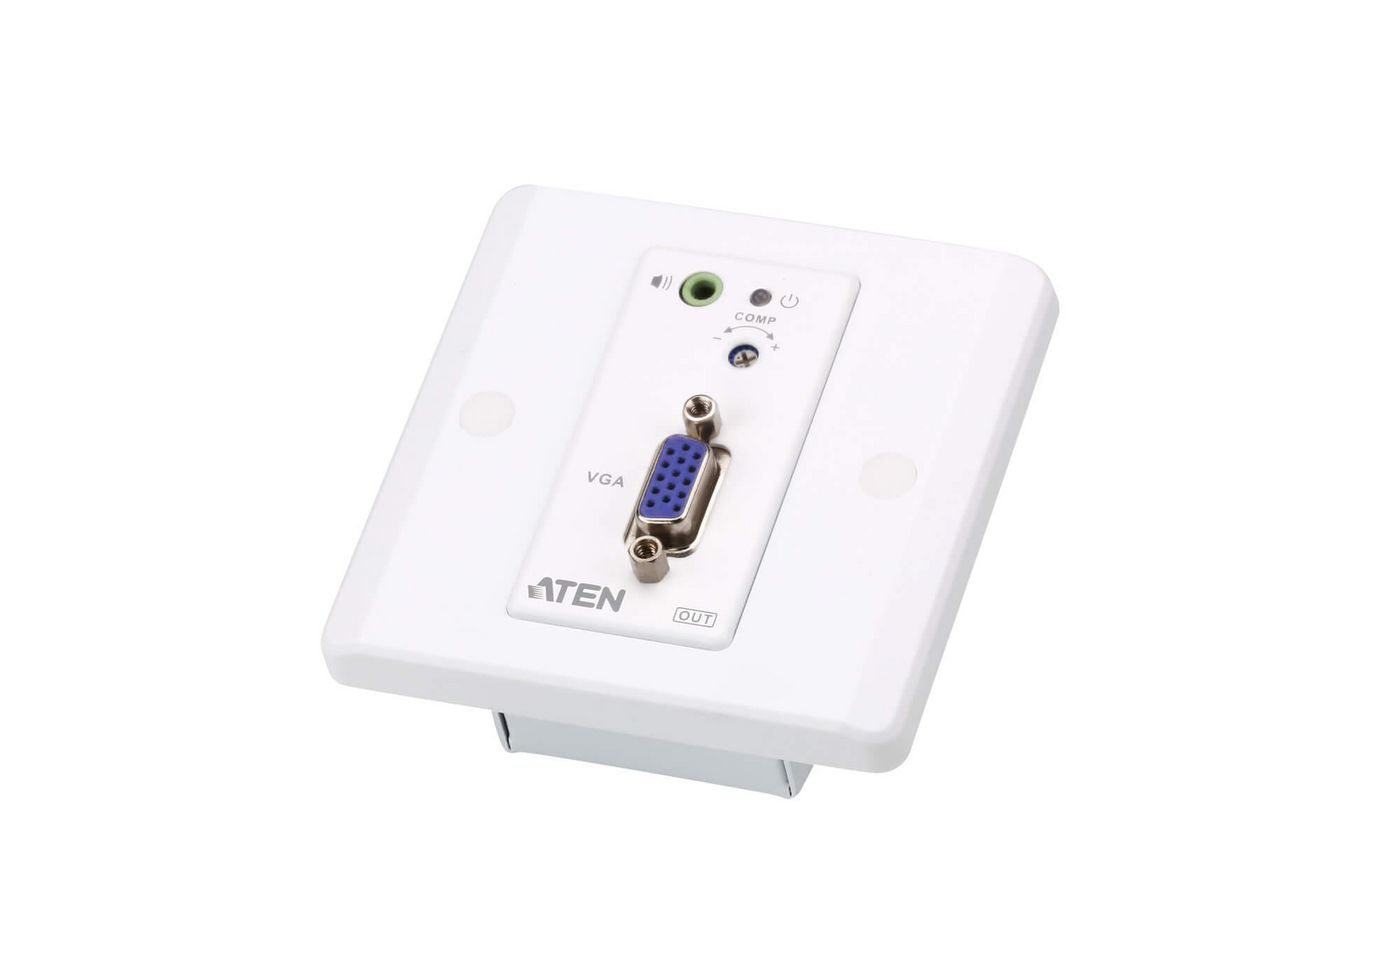 Wall Plate (eu  1 Gang) Vga Cat 5 Extender (150m  1920 X 1200 Up To 30m) With Audio